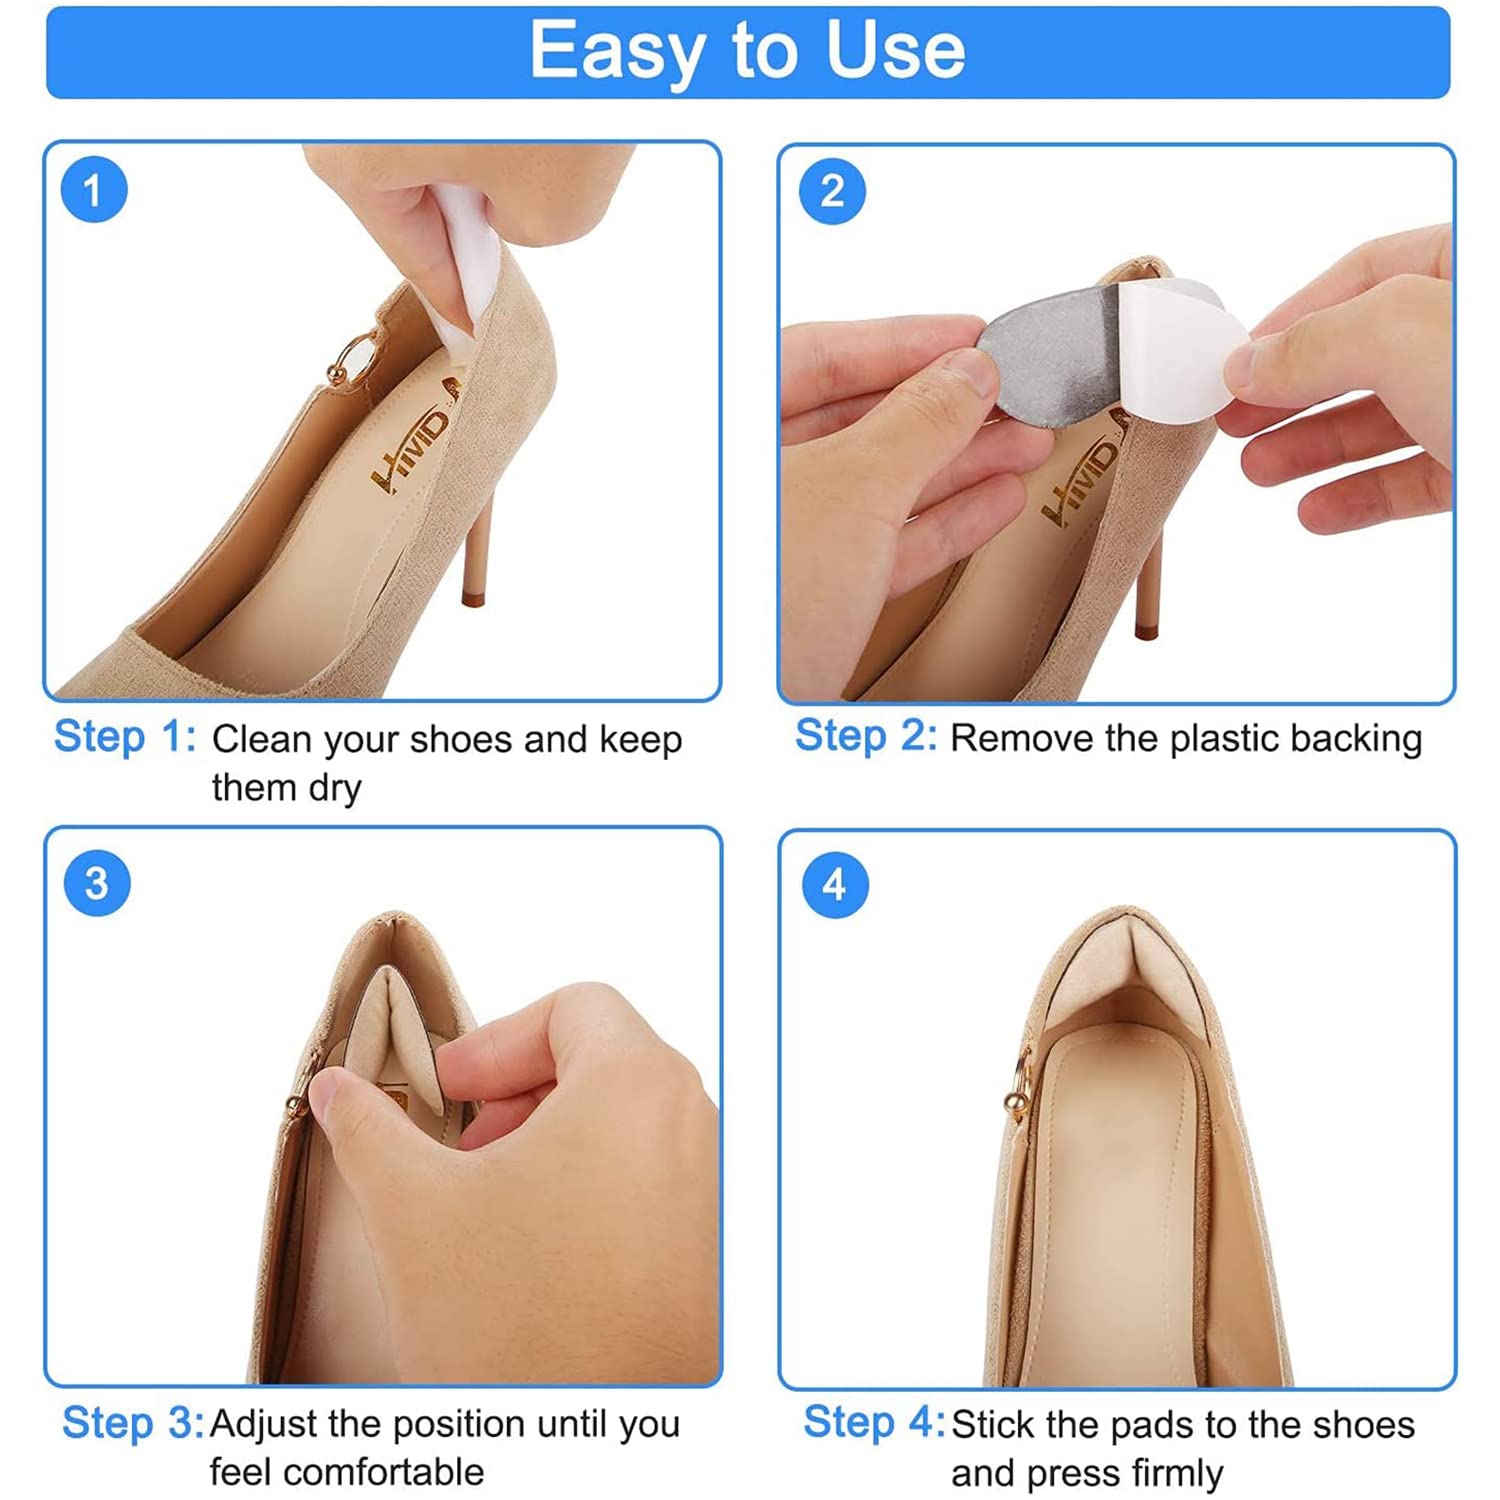 Amazon.com: 6 Pairs Heel Cushion Pads, Super Comfort Microsuede Heel Grips,  Self-Adhesive Heel Liners for Big Shoes, Loose Shoes, Heel Pain Relief and  Heel Blisters. : Health & Household